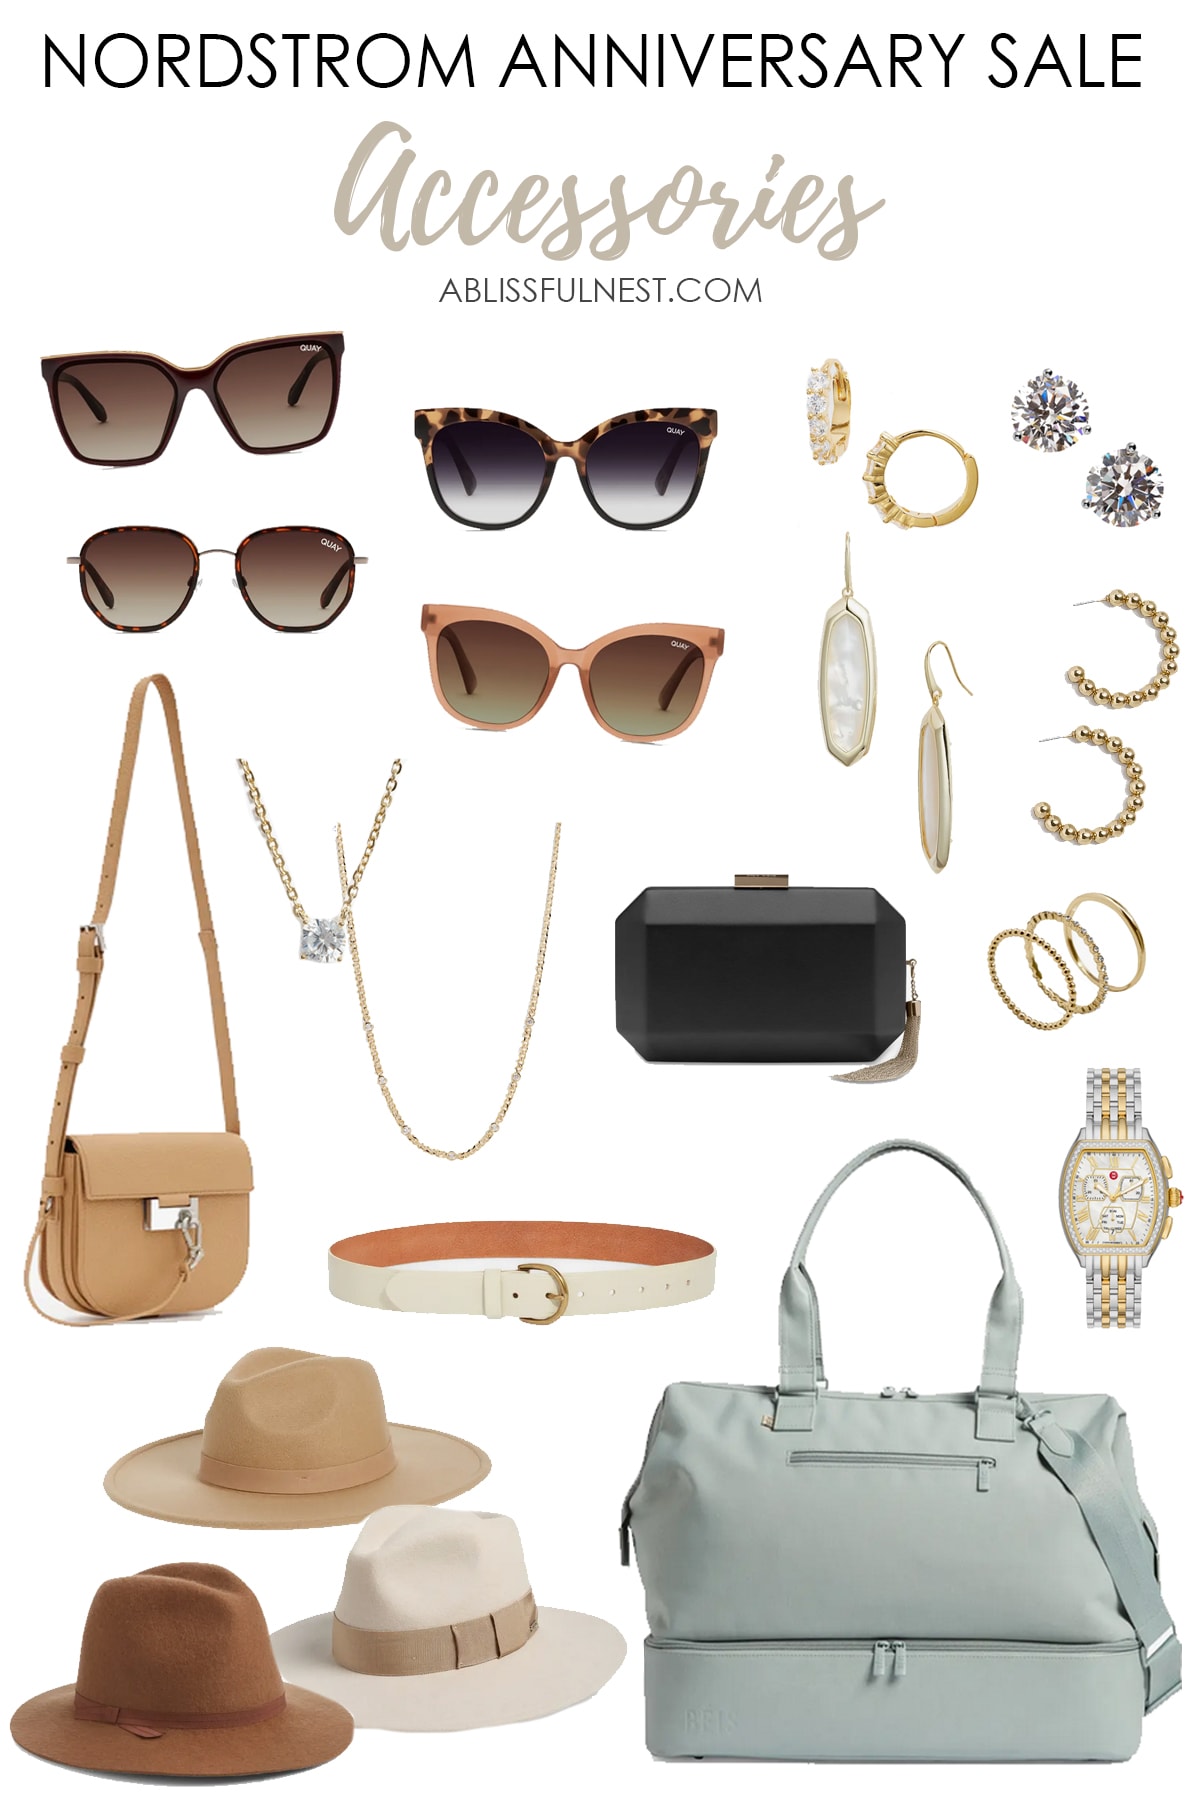 Nordstrom Anniversary Sale jewelry, sunglasses and accessories! #ABlissfulNest